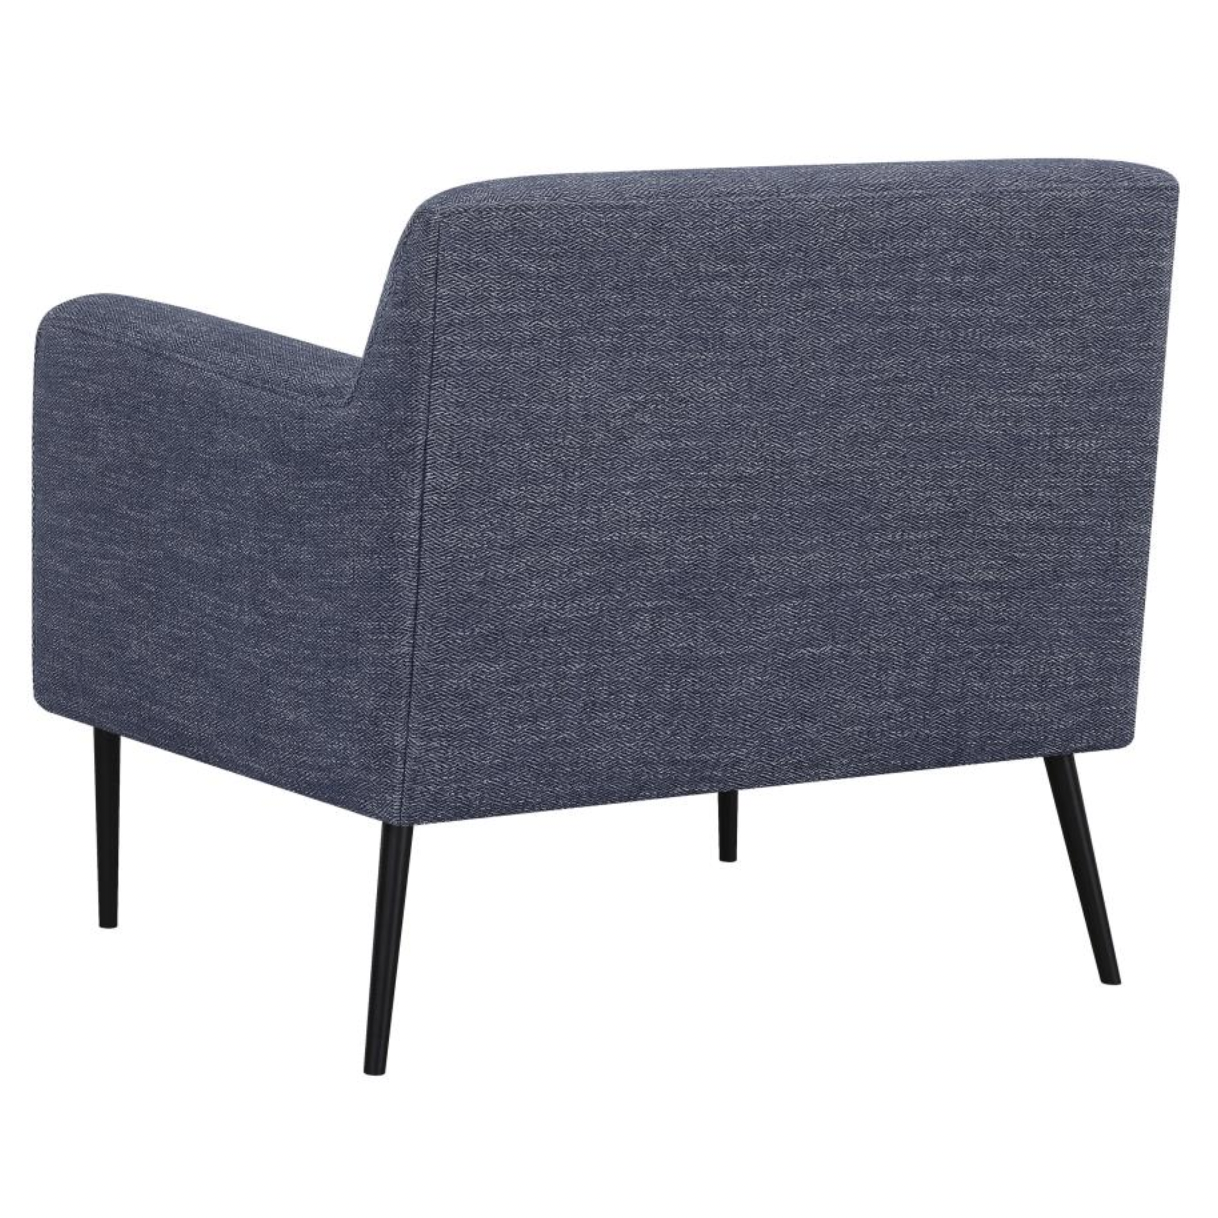 DARLENE Upholstered Track Arms Accent Chair Navy Blue